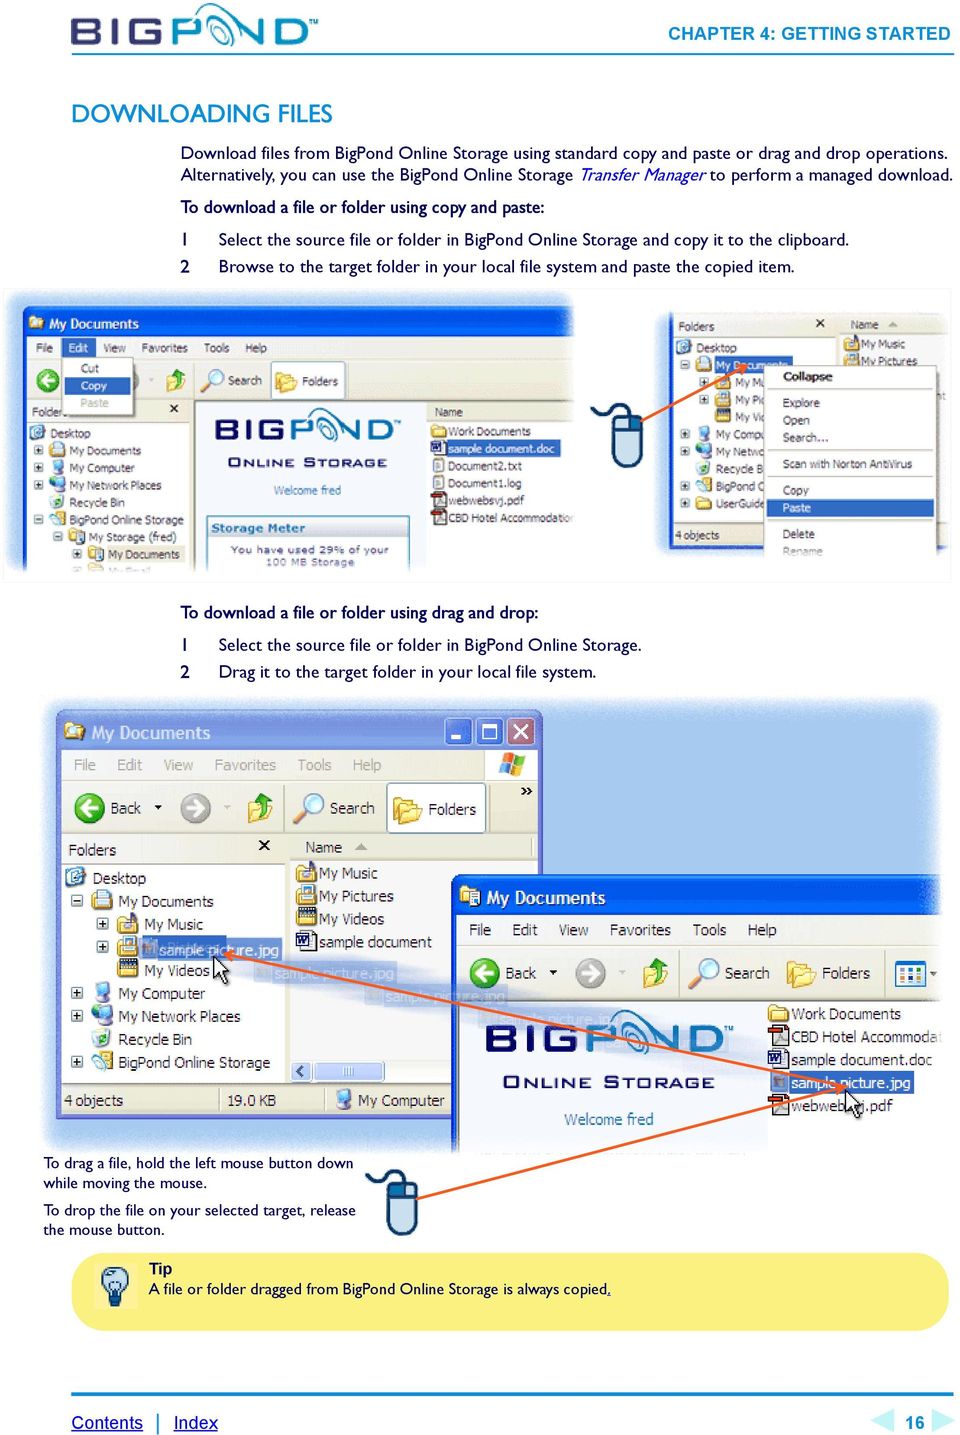 To download a file or folder using copy and paste: 1 Select the source file or folder in BigPond Online Storage and copy it to the clipboard.